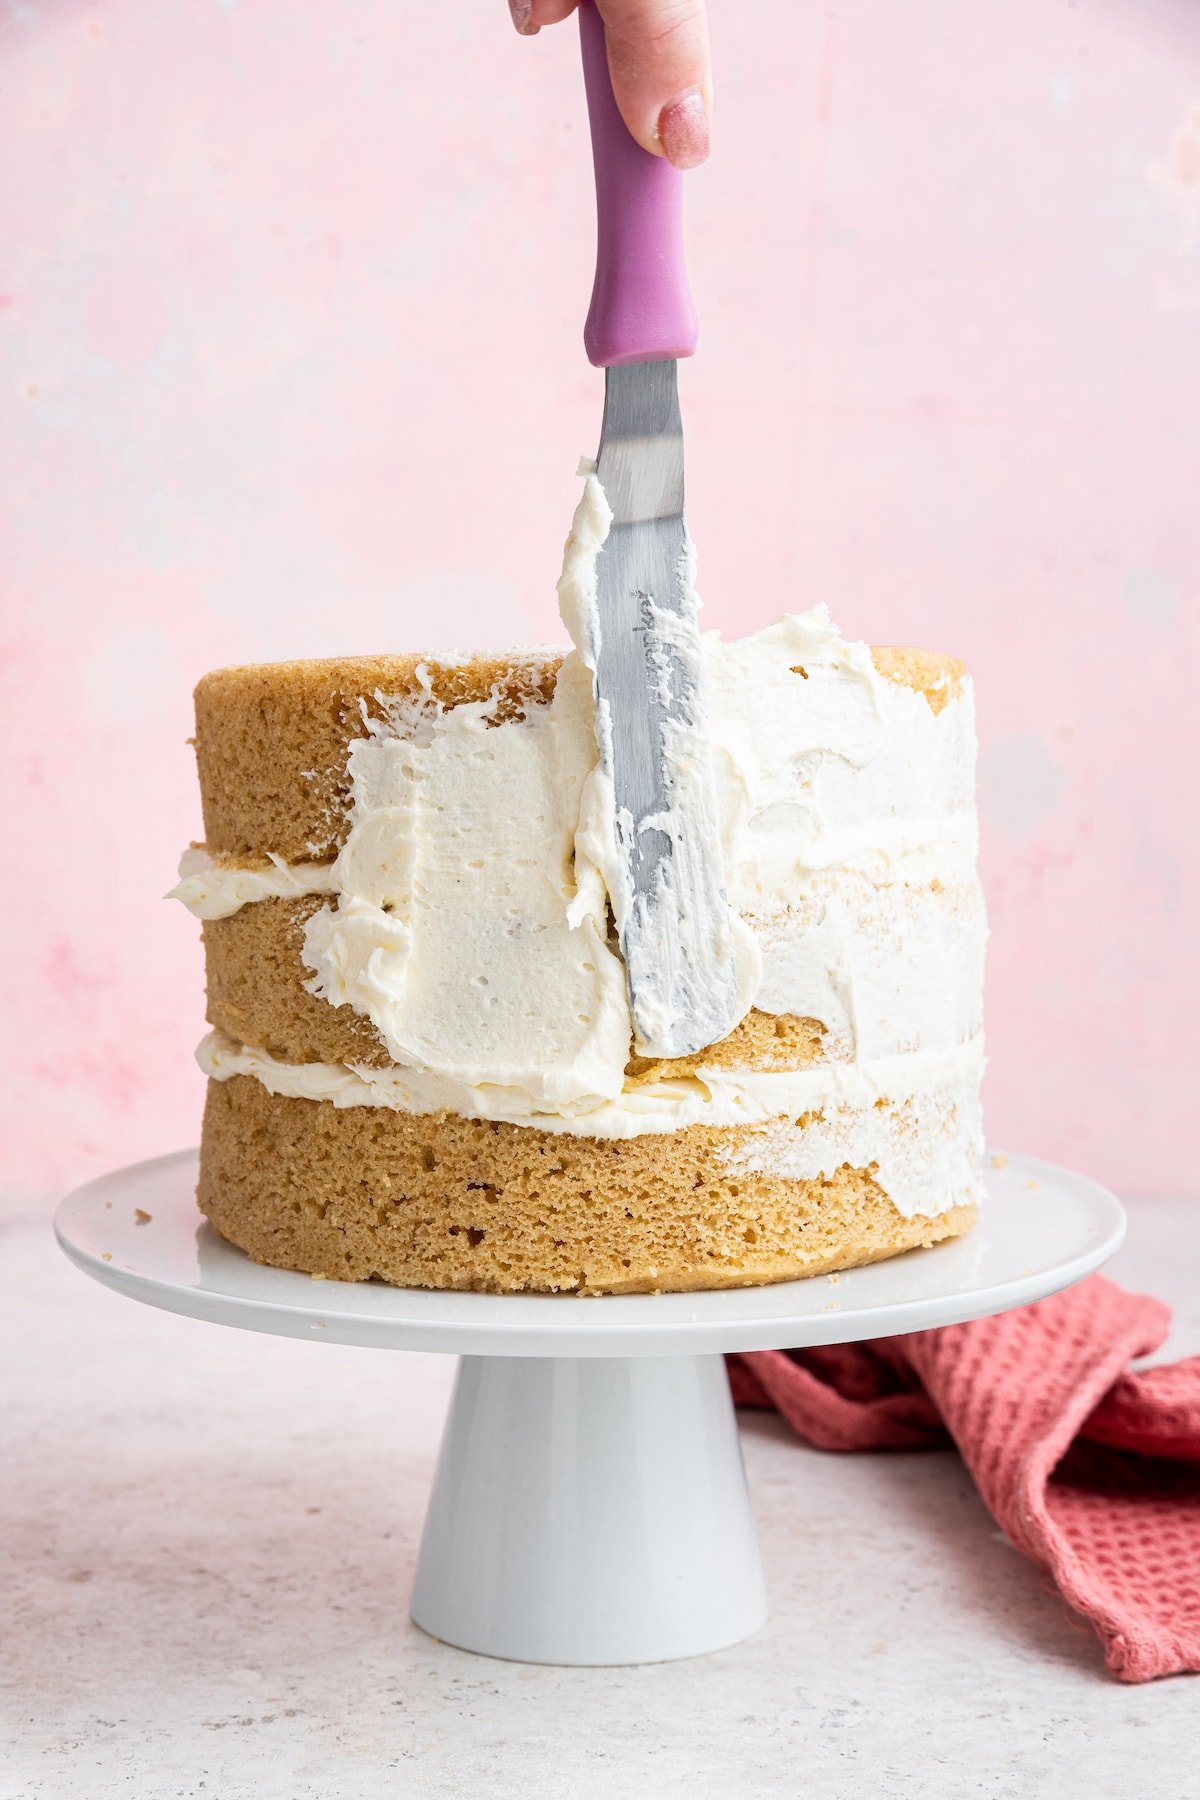 A woman's hand uses a spatula to apply white frosting to a vanilla cake.